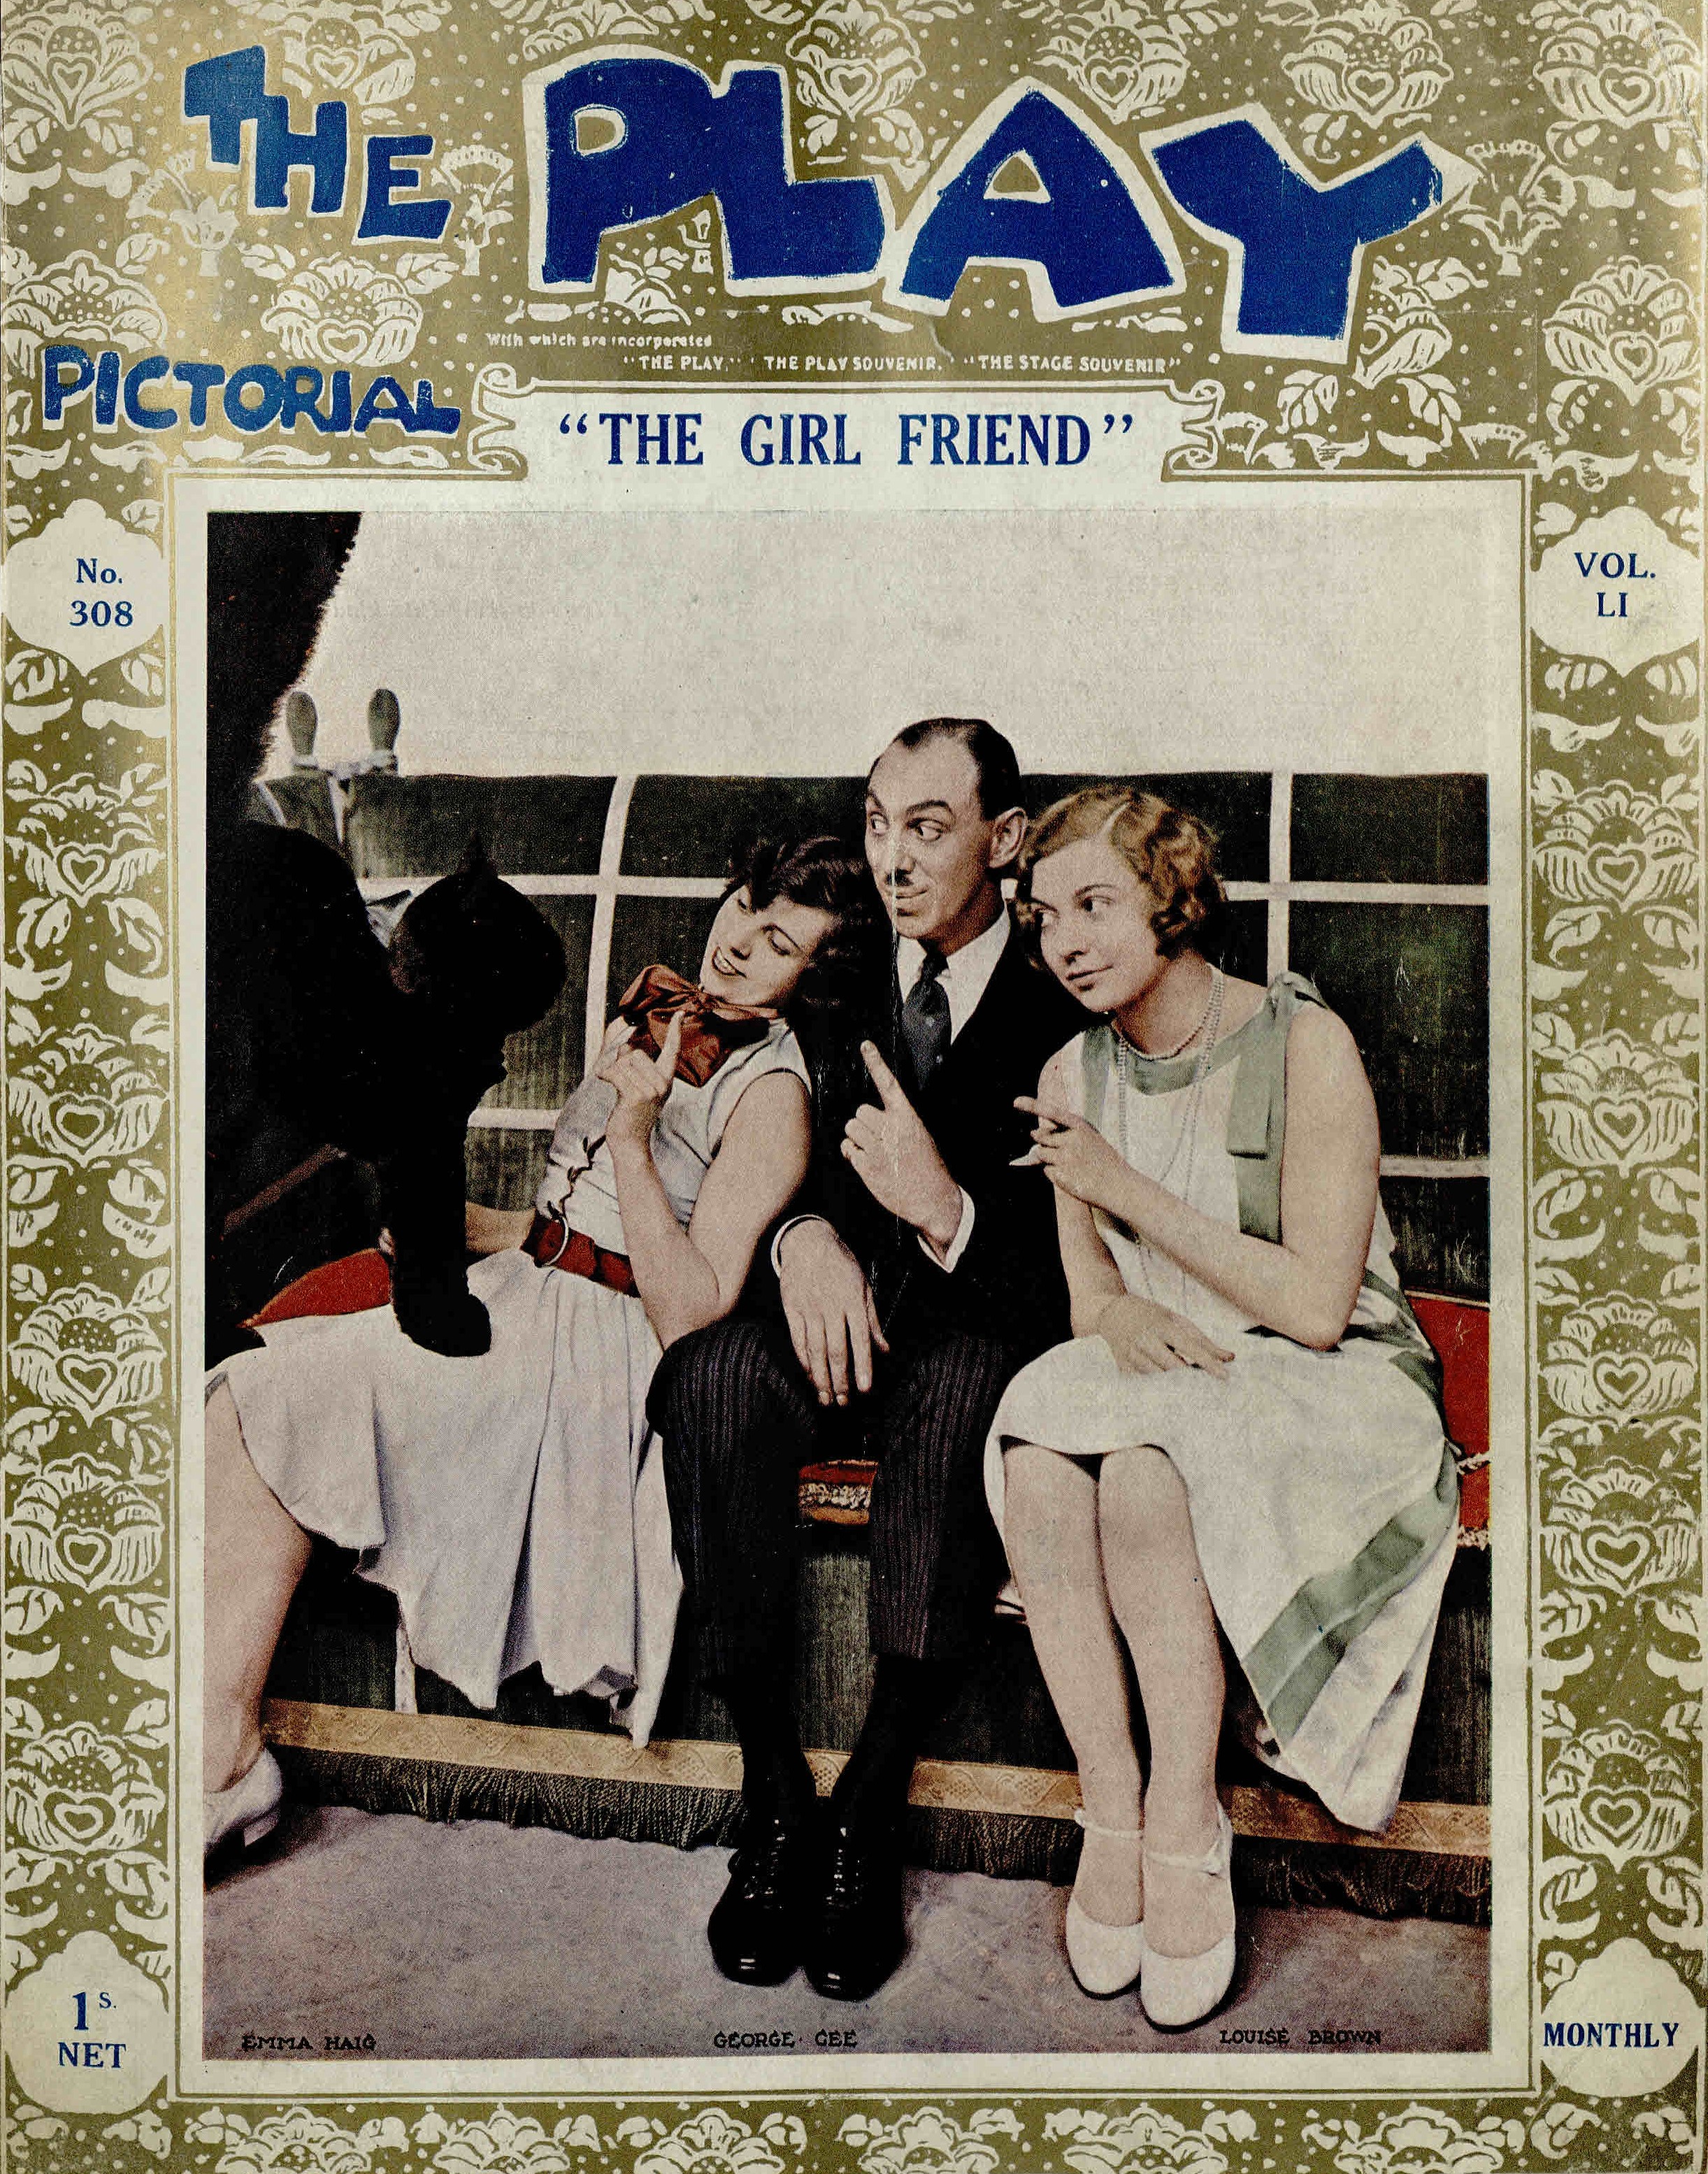 Front cover of Play Pictorial, featuring The Girl Friend